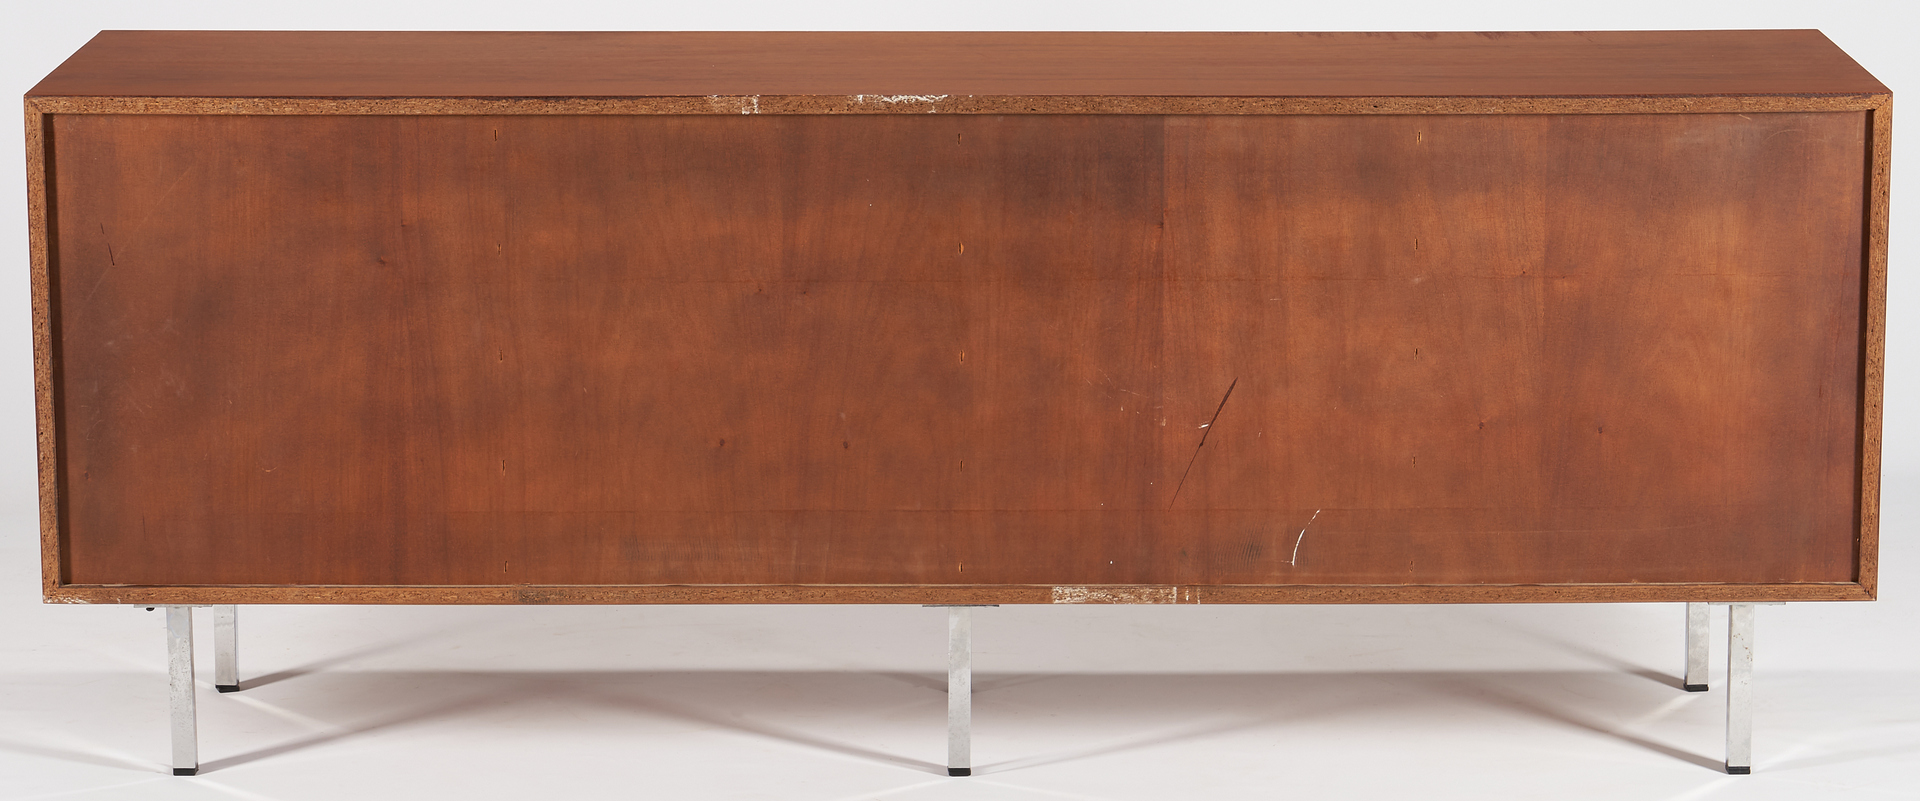 Lot 610:  Florence Knoll Walnut Credenza